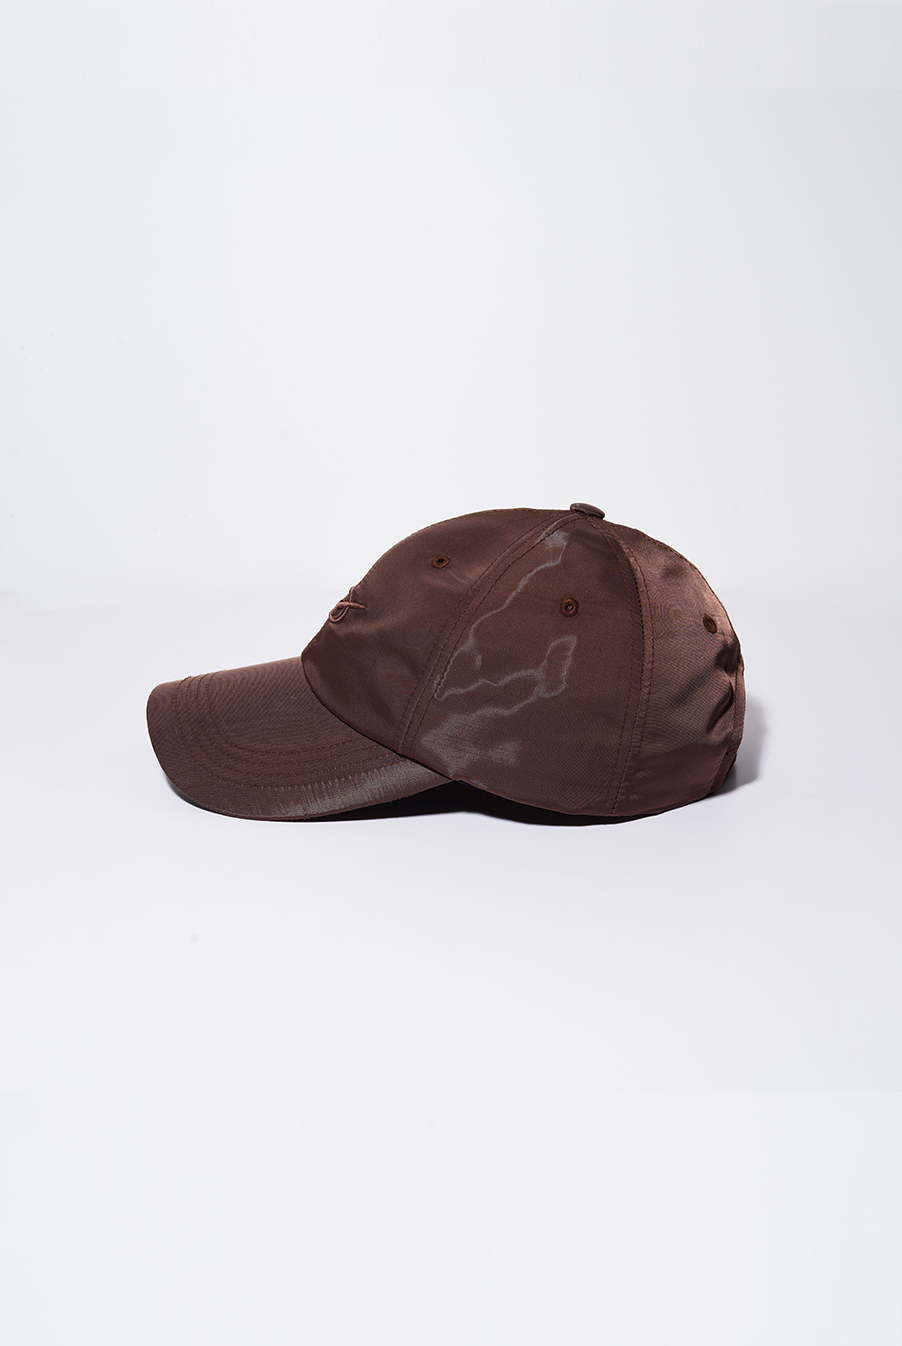 SHINY LOGO EMBROIDERY CAP - BROWN